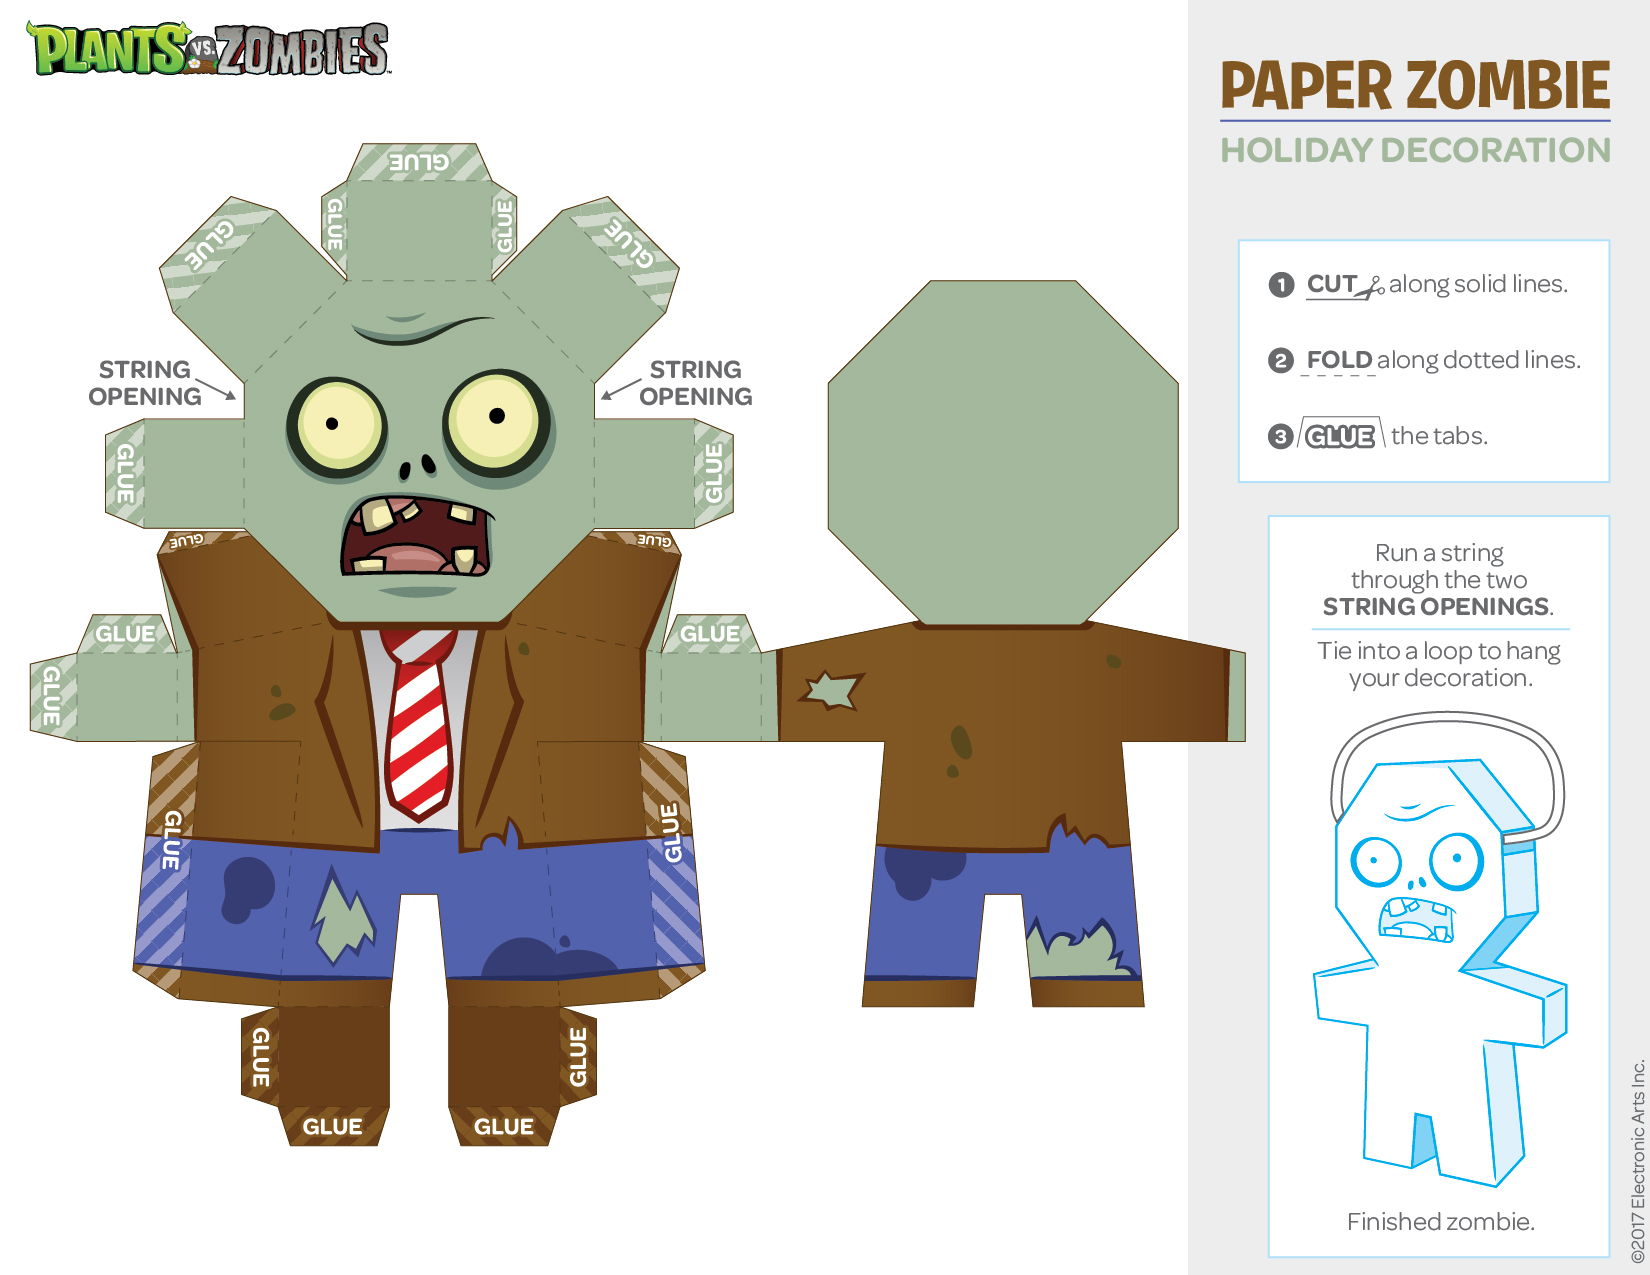 download the last version for ipod Zombie Craft 2023